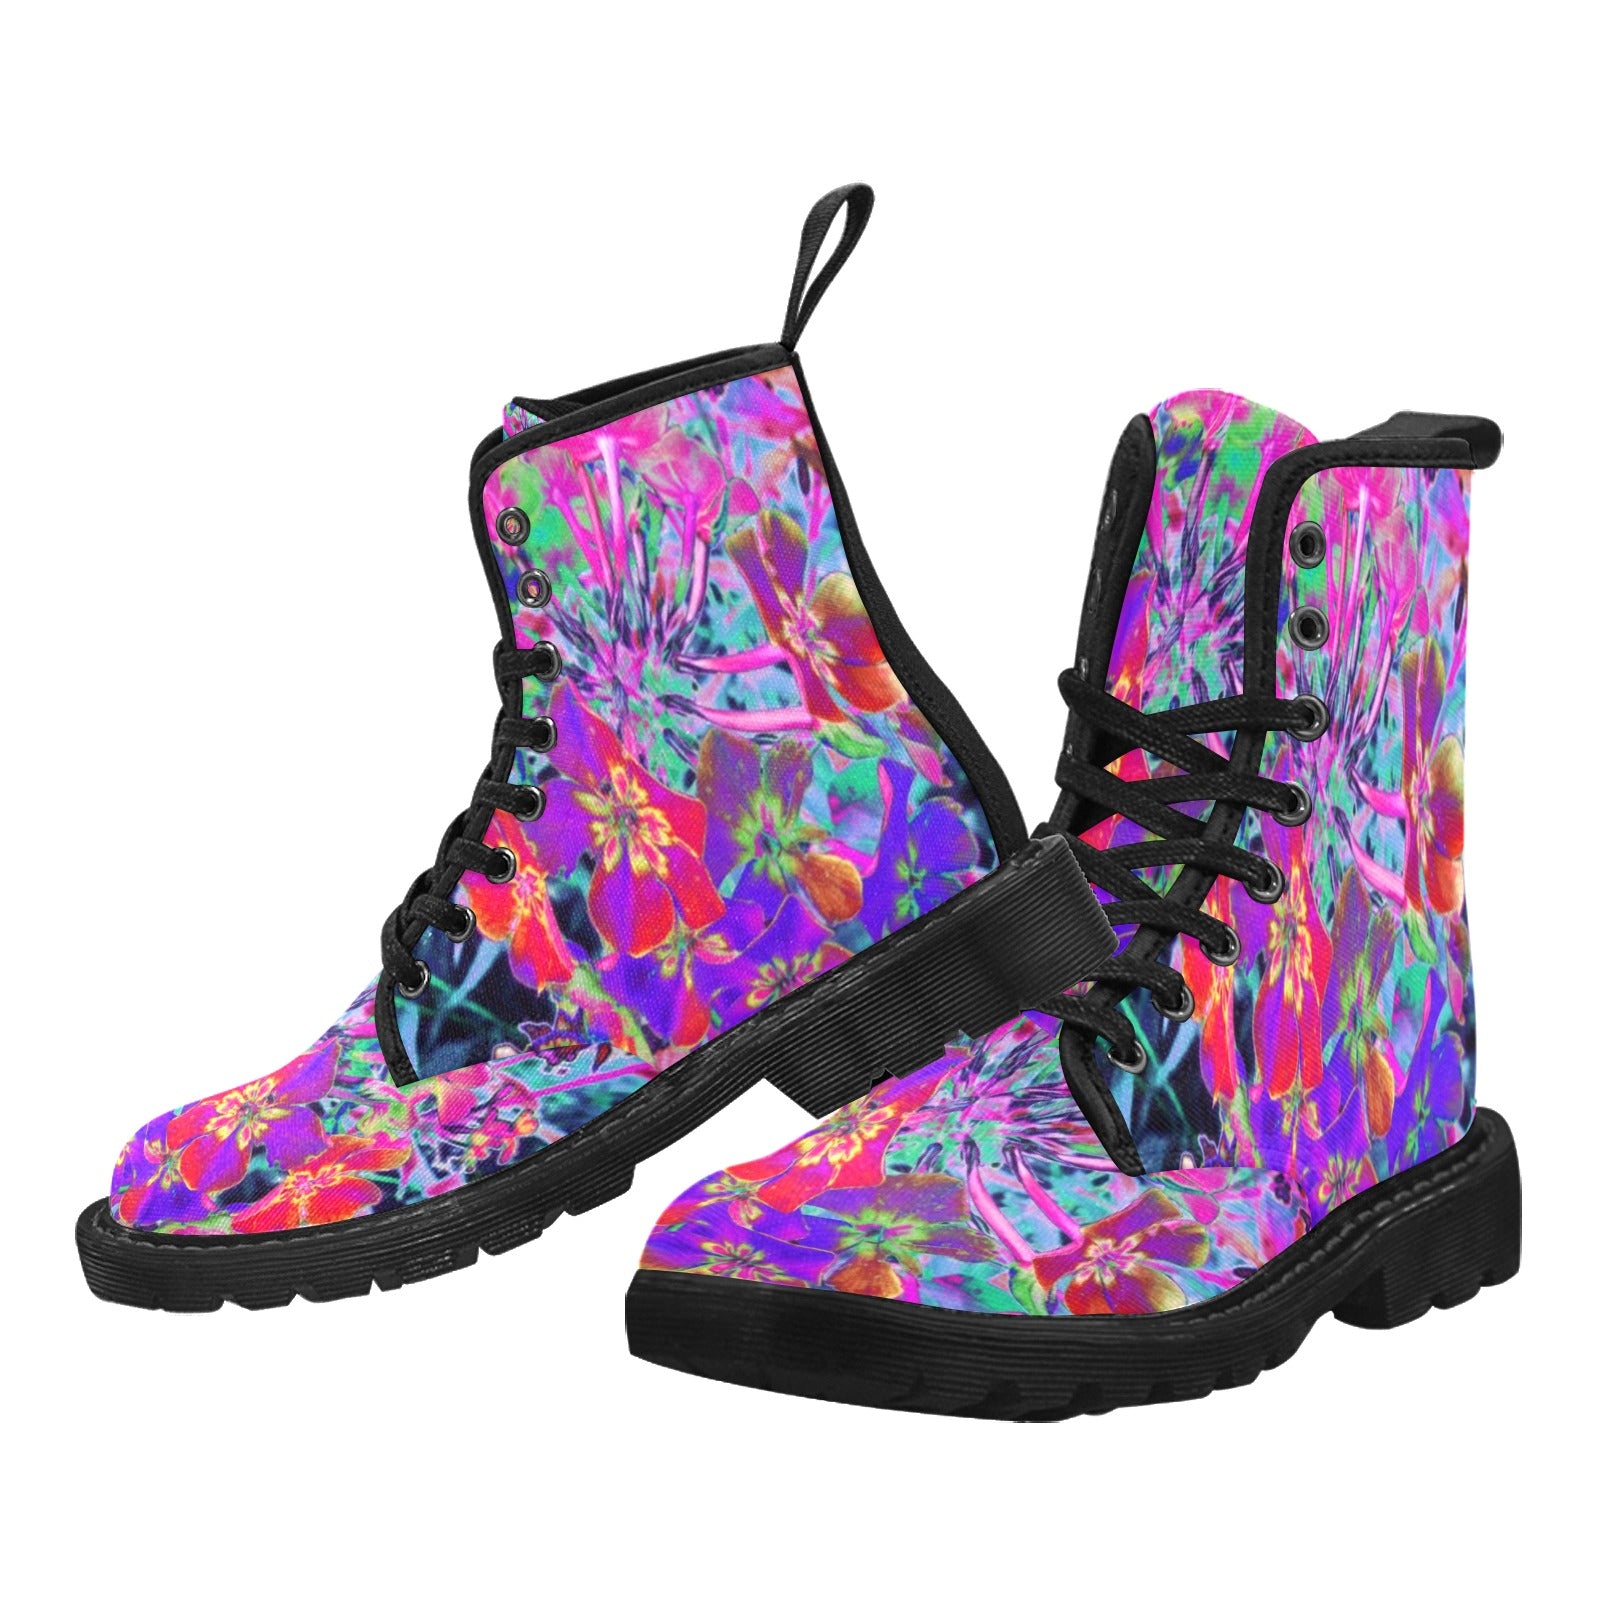 Boots for Women, Dramatic Psychedelic Colorful Red and Purple Flowers - Black